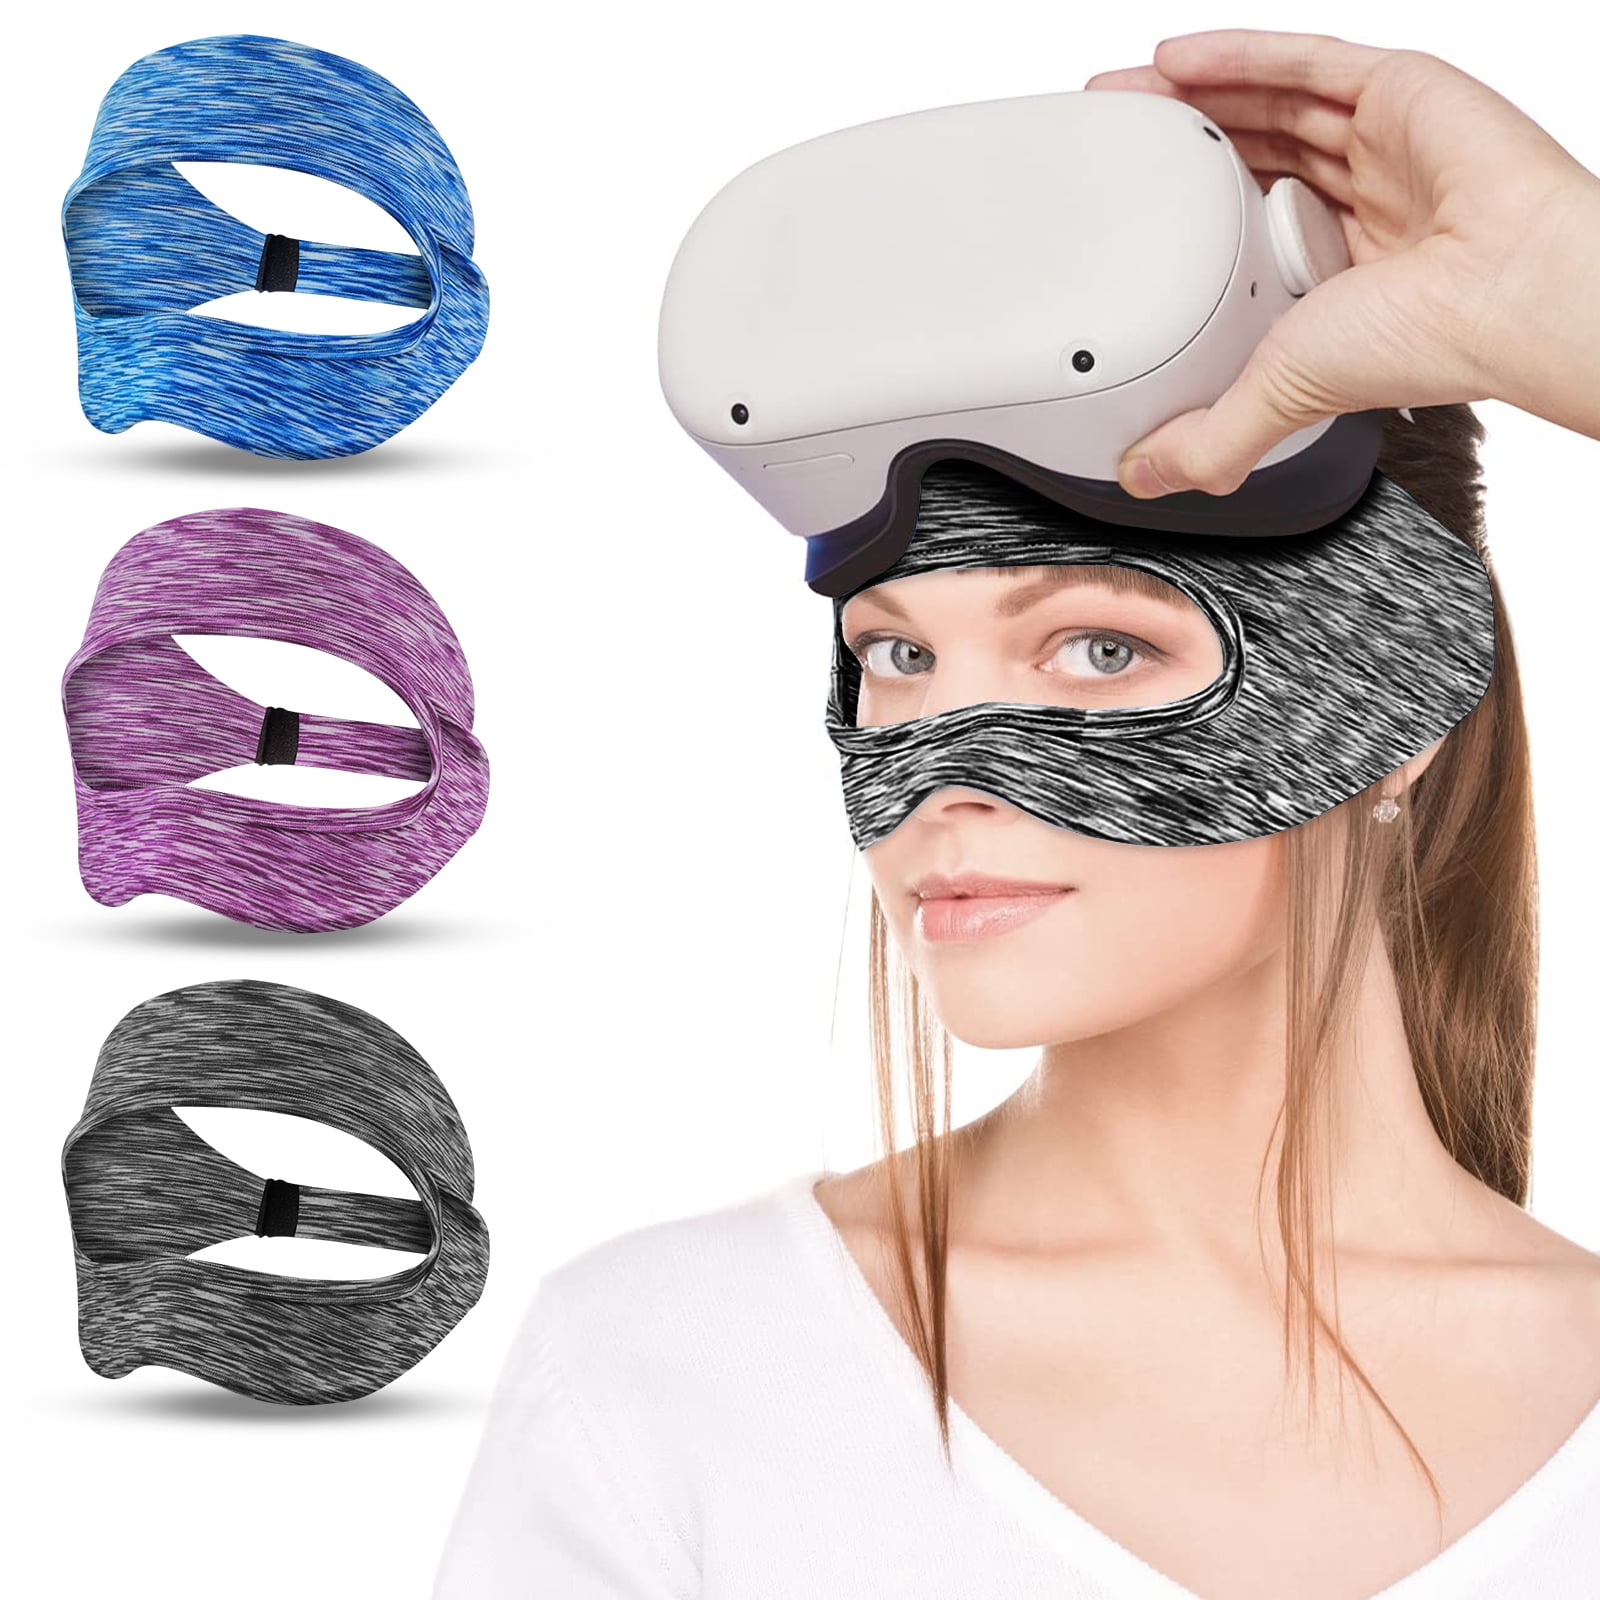 LuMon VR Face Cover Mask,Silicone Eye Mask Sweat-proof leak-proof,Protective Cover Reusable Elastic Smooth Soft Portable Accessories 